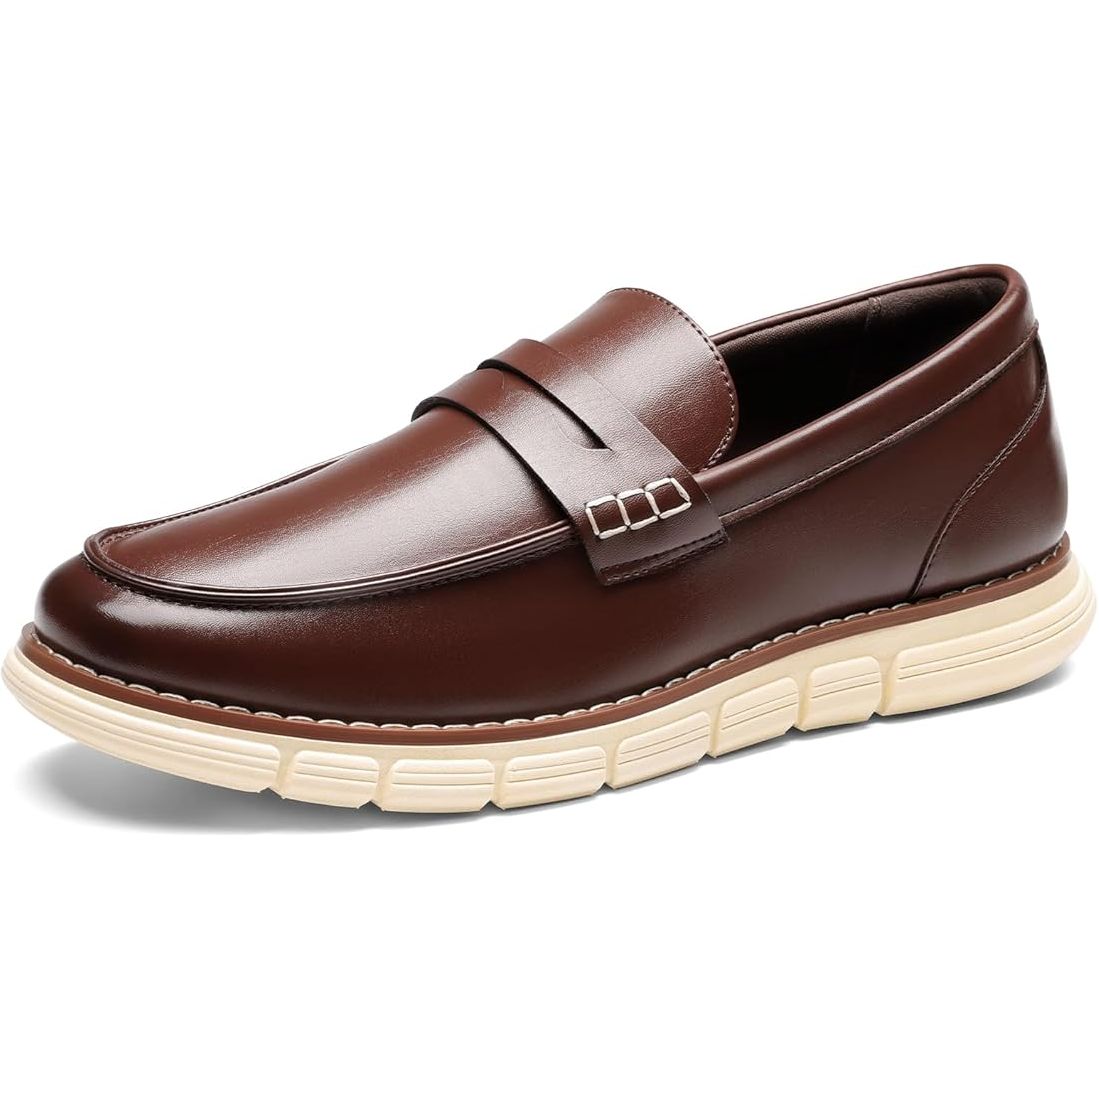 Bruno Marc Men's Casual Dress Shoes Slip-on Lightweight Penny Loafers